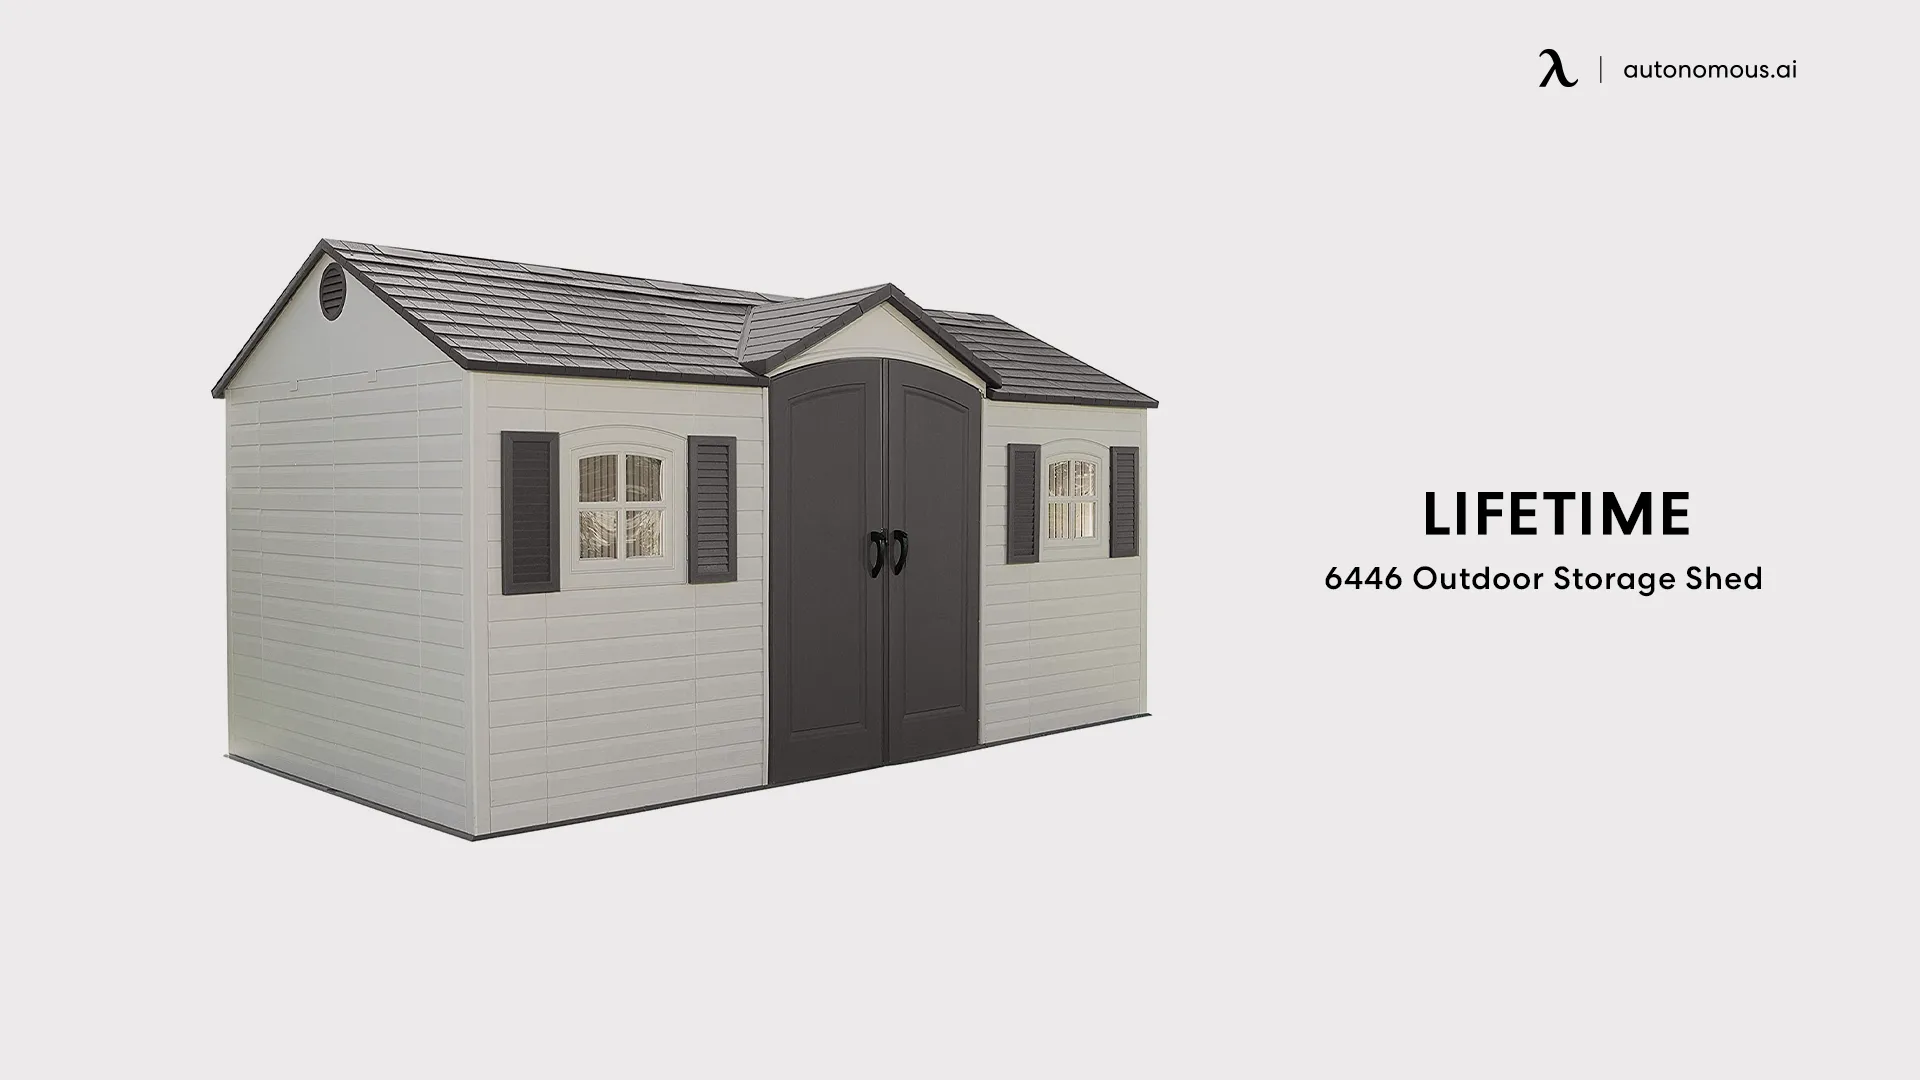 Lifetime’s 6446 Outdoor Storage Shed